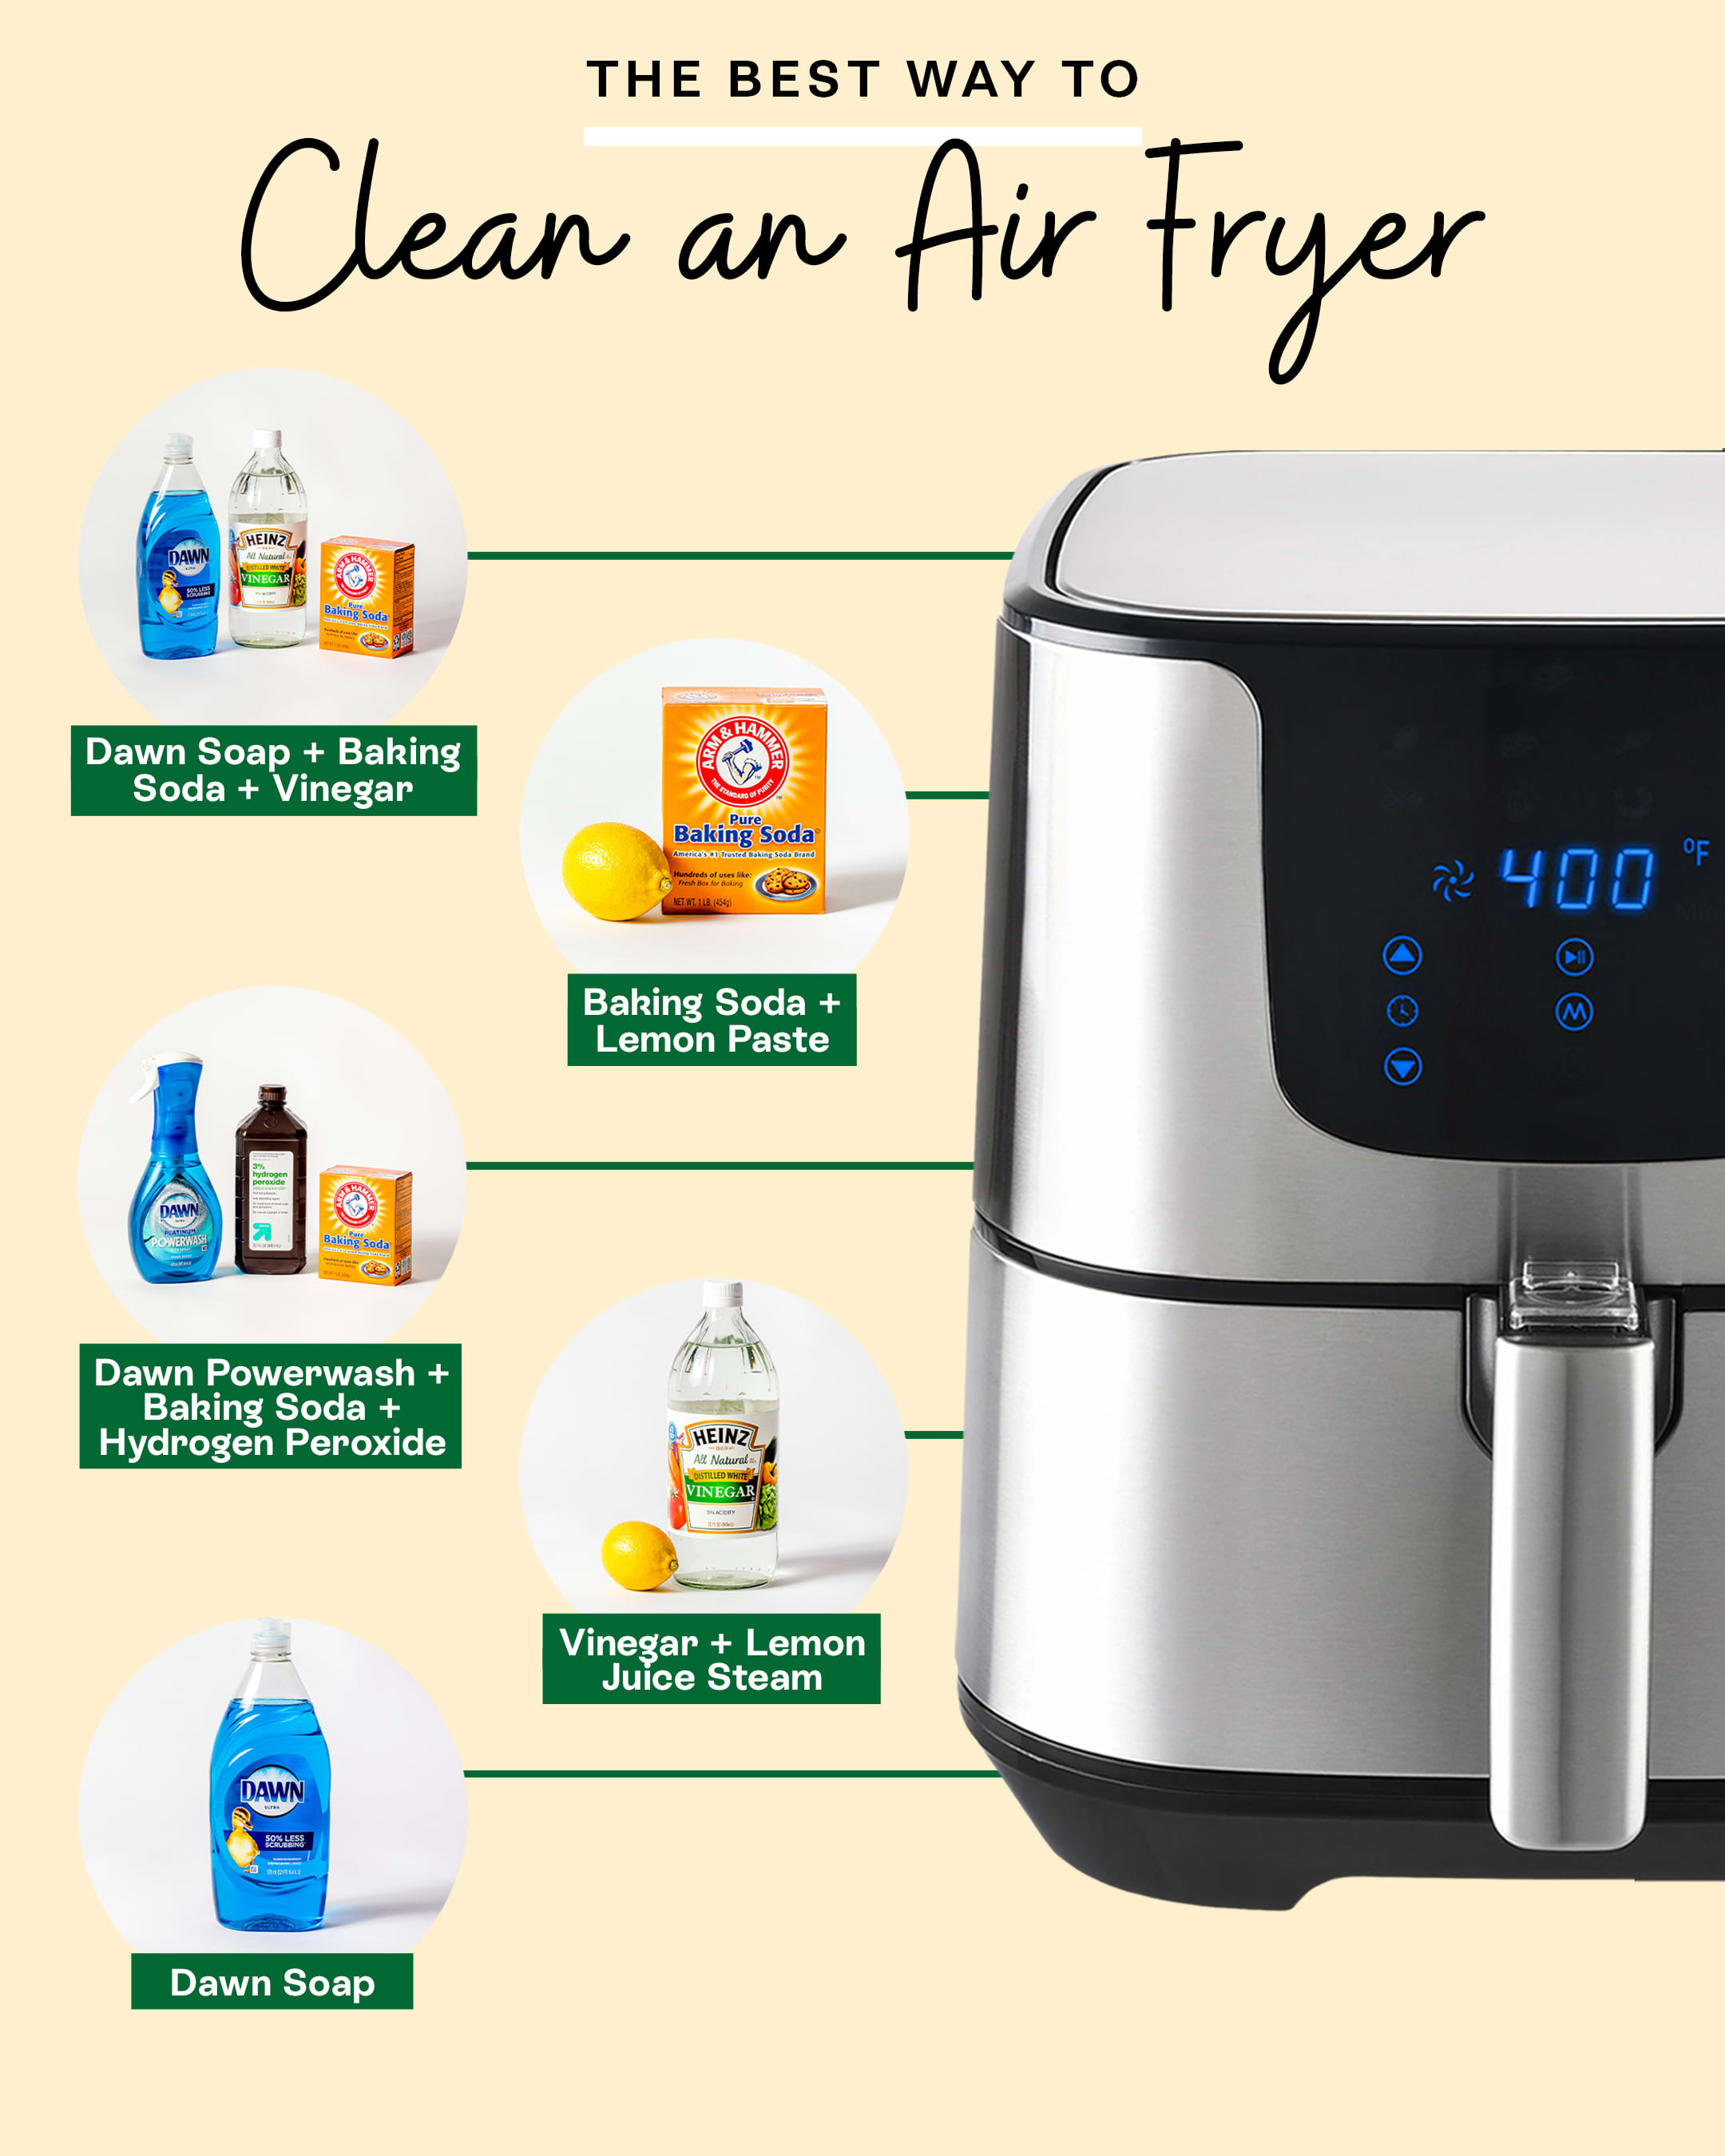 https://cdn.apartmenttherapy.info/image/upload/v1663180971/k/Photo/Lifestyle/2022-08-Cleaning-Showdown-We-Tested-Five-Methods-to-Clean-an-Air-Fryer-Basket/CleaningShowdown-air-fryer-updated.jpg